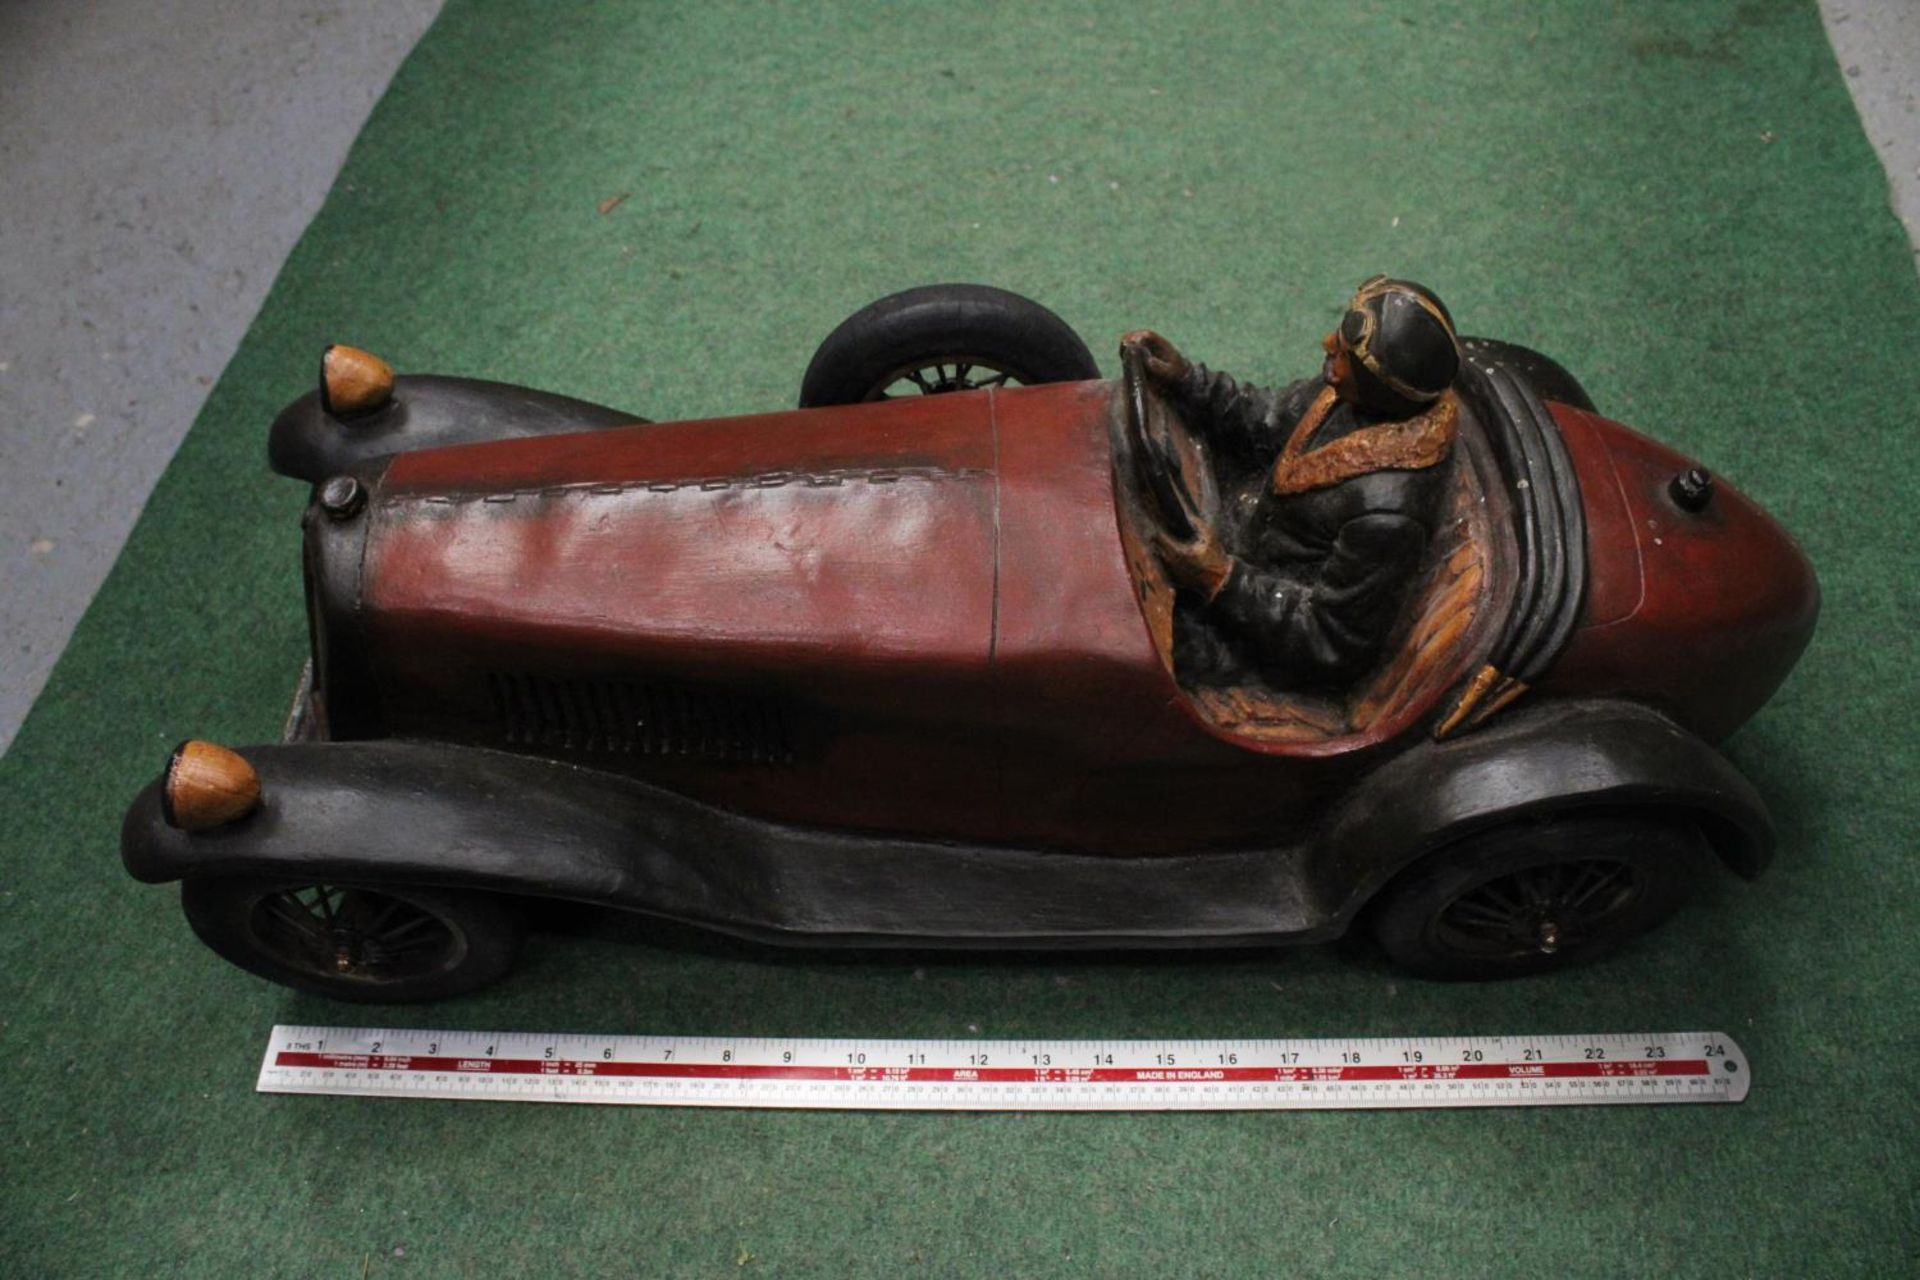 A MODEL OF A 1926 BROOKLANDS RACING CAR AND DRIVER 27" X 11" X 10" - Image 4 of 4